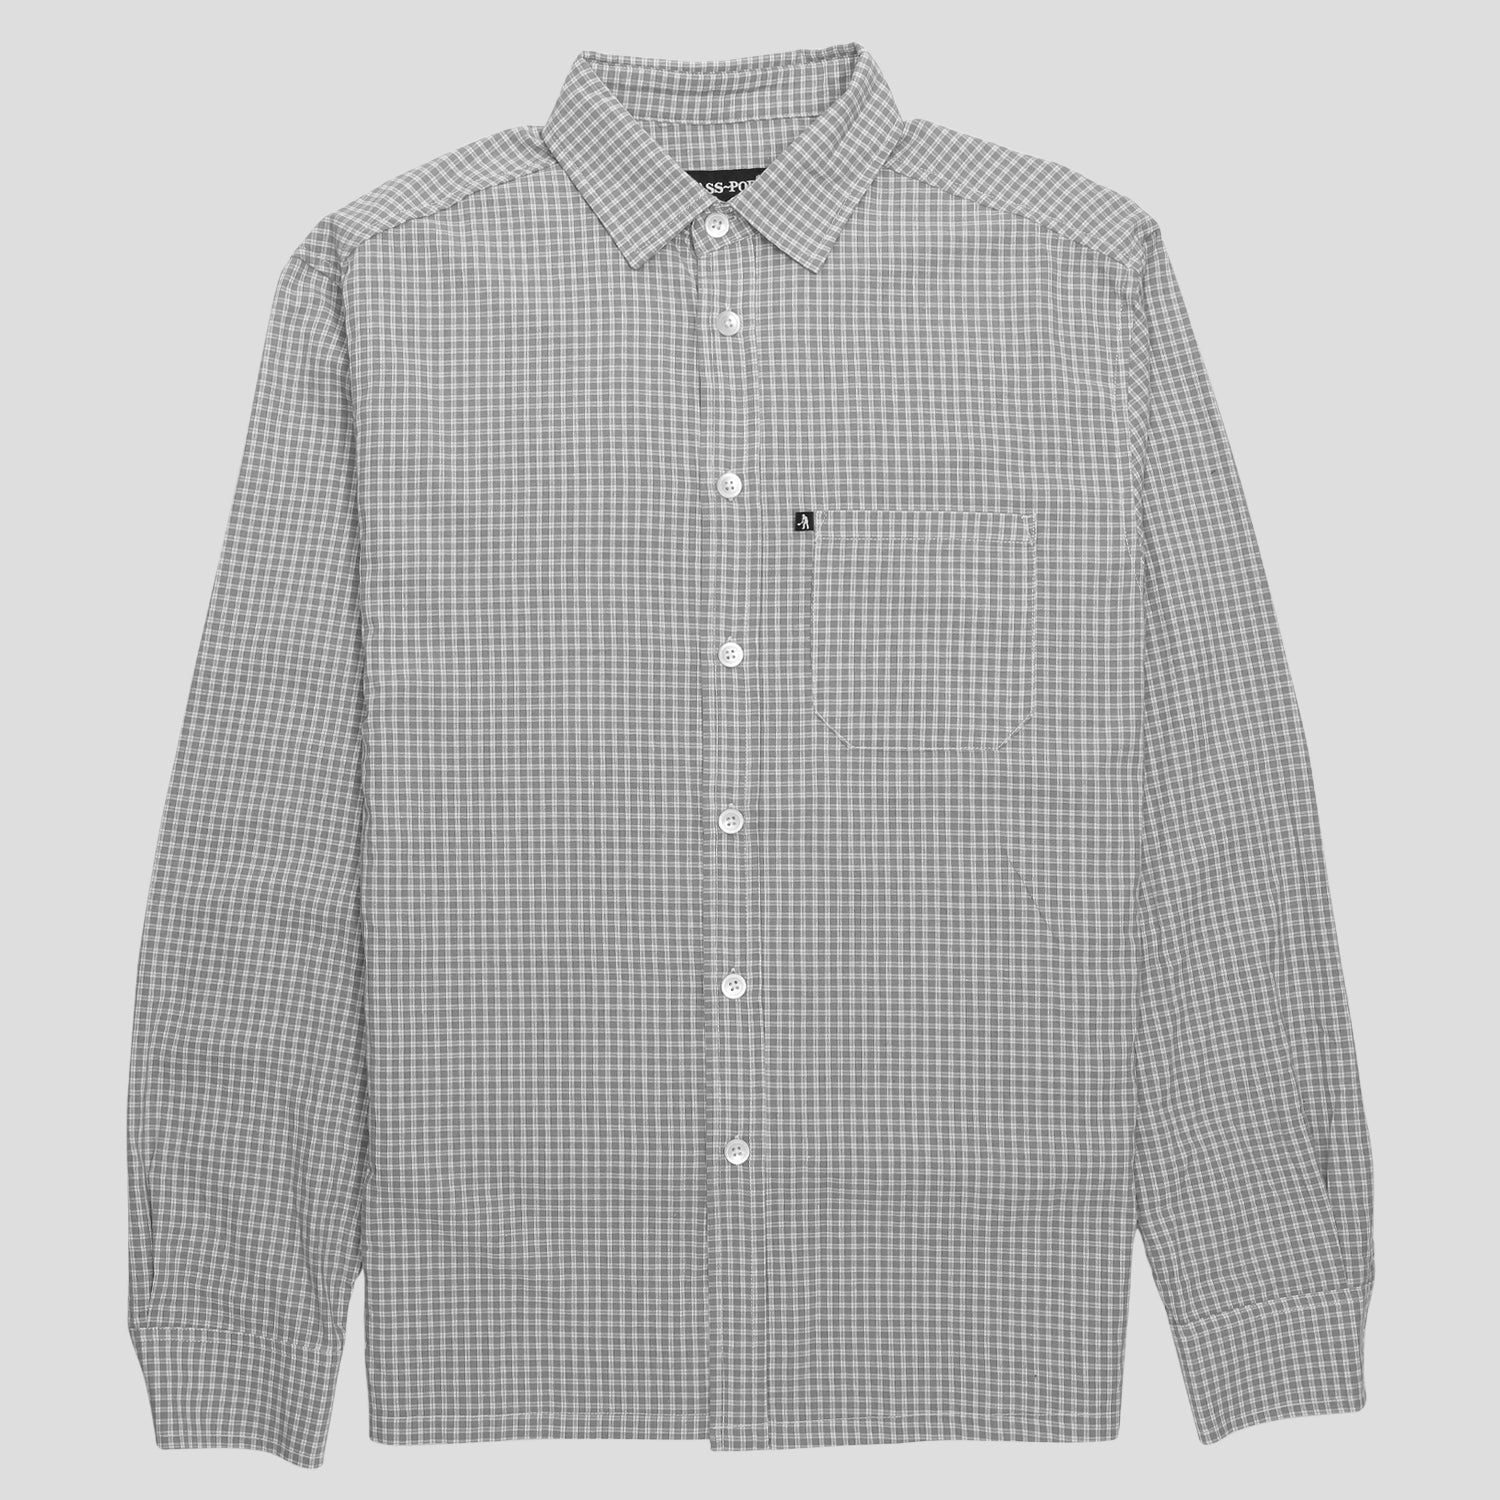 PASS~PORT "WORKERS CHECK" L/S SHIRT ASH